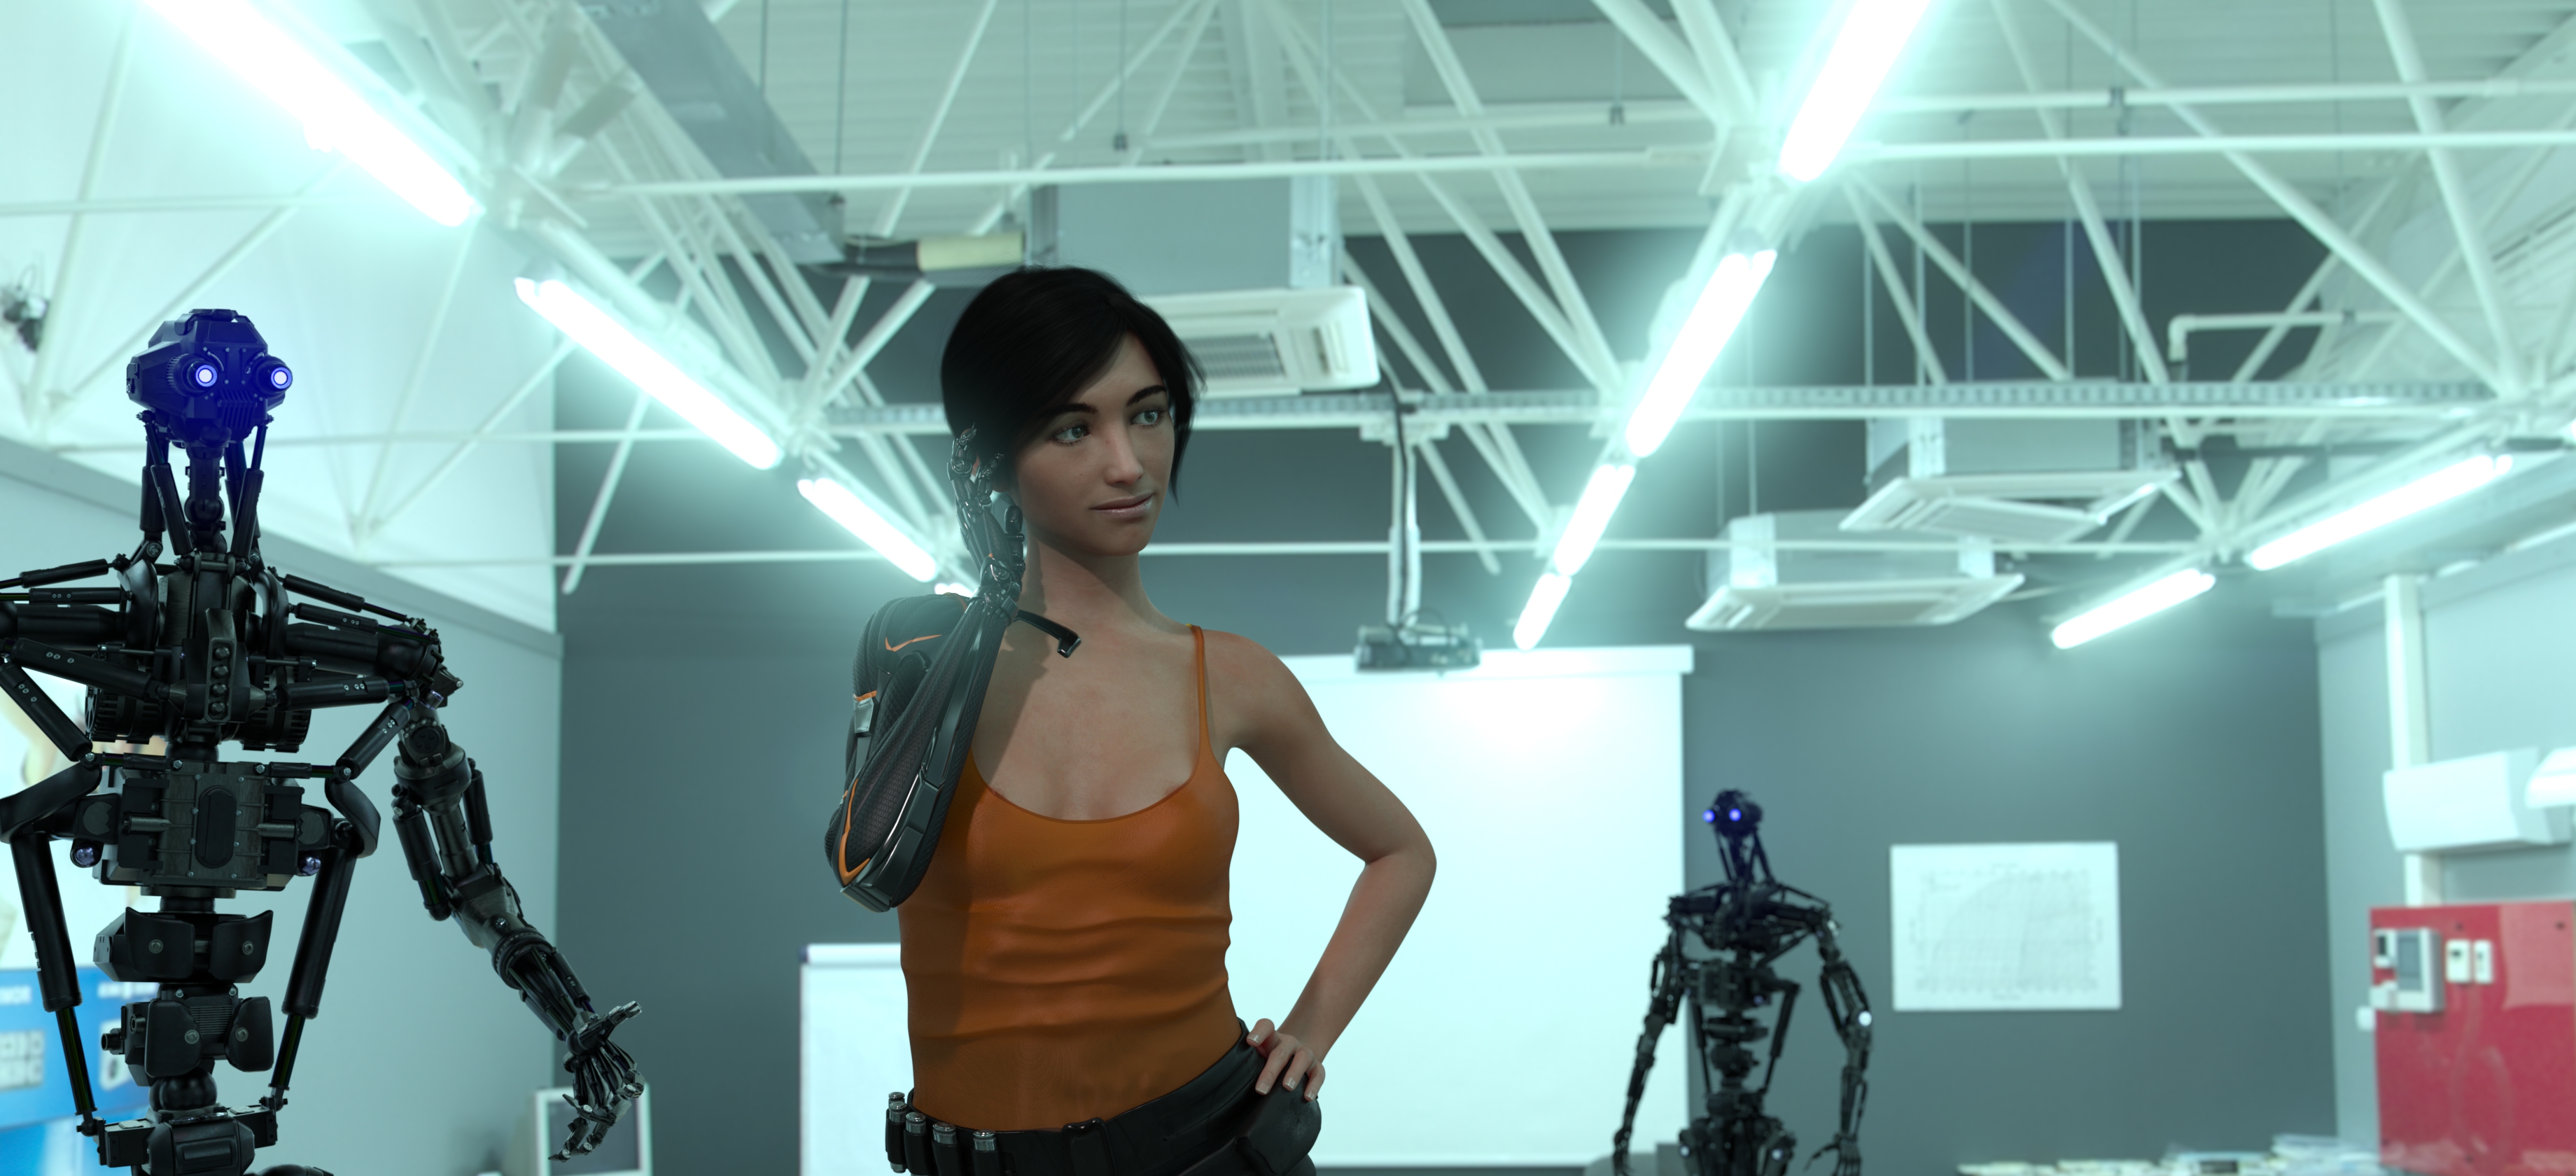 Free photo Sakirah Rodaun in Cyberchick short film during post recovery orientation with robot instructors.